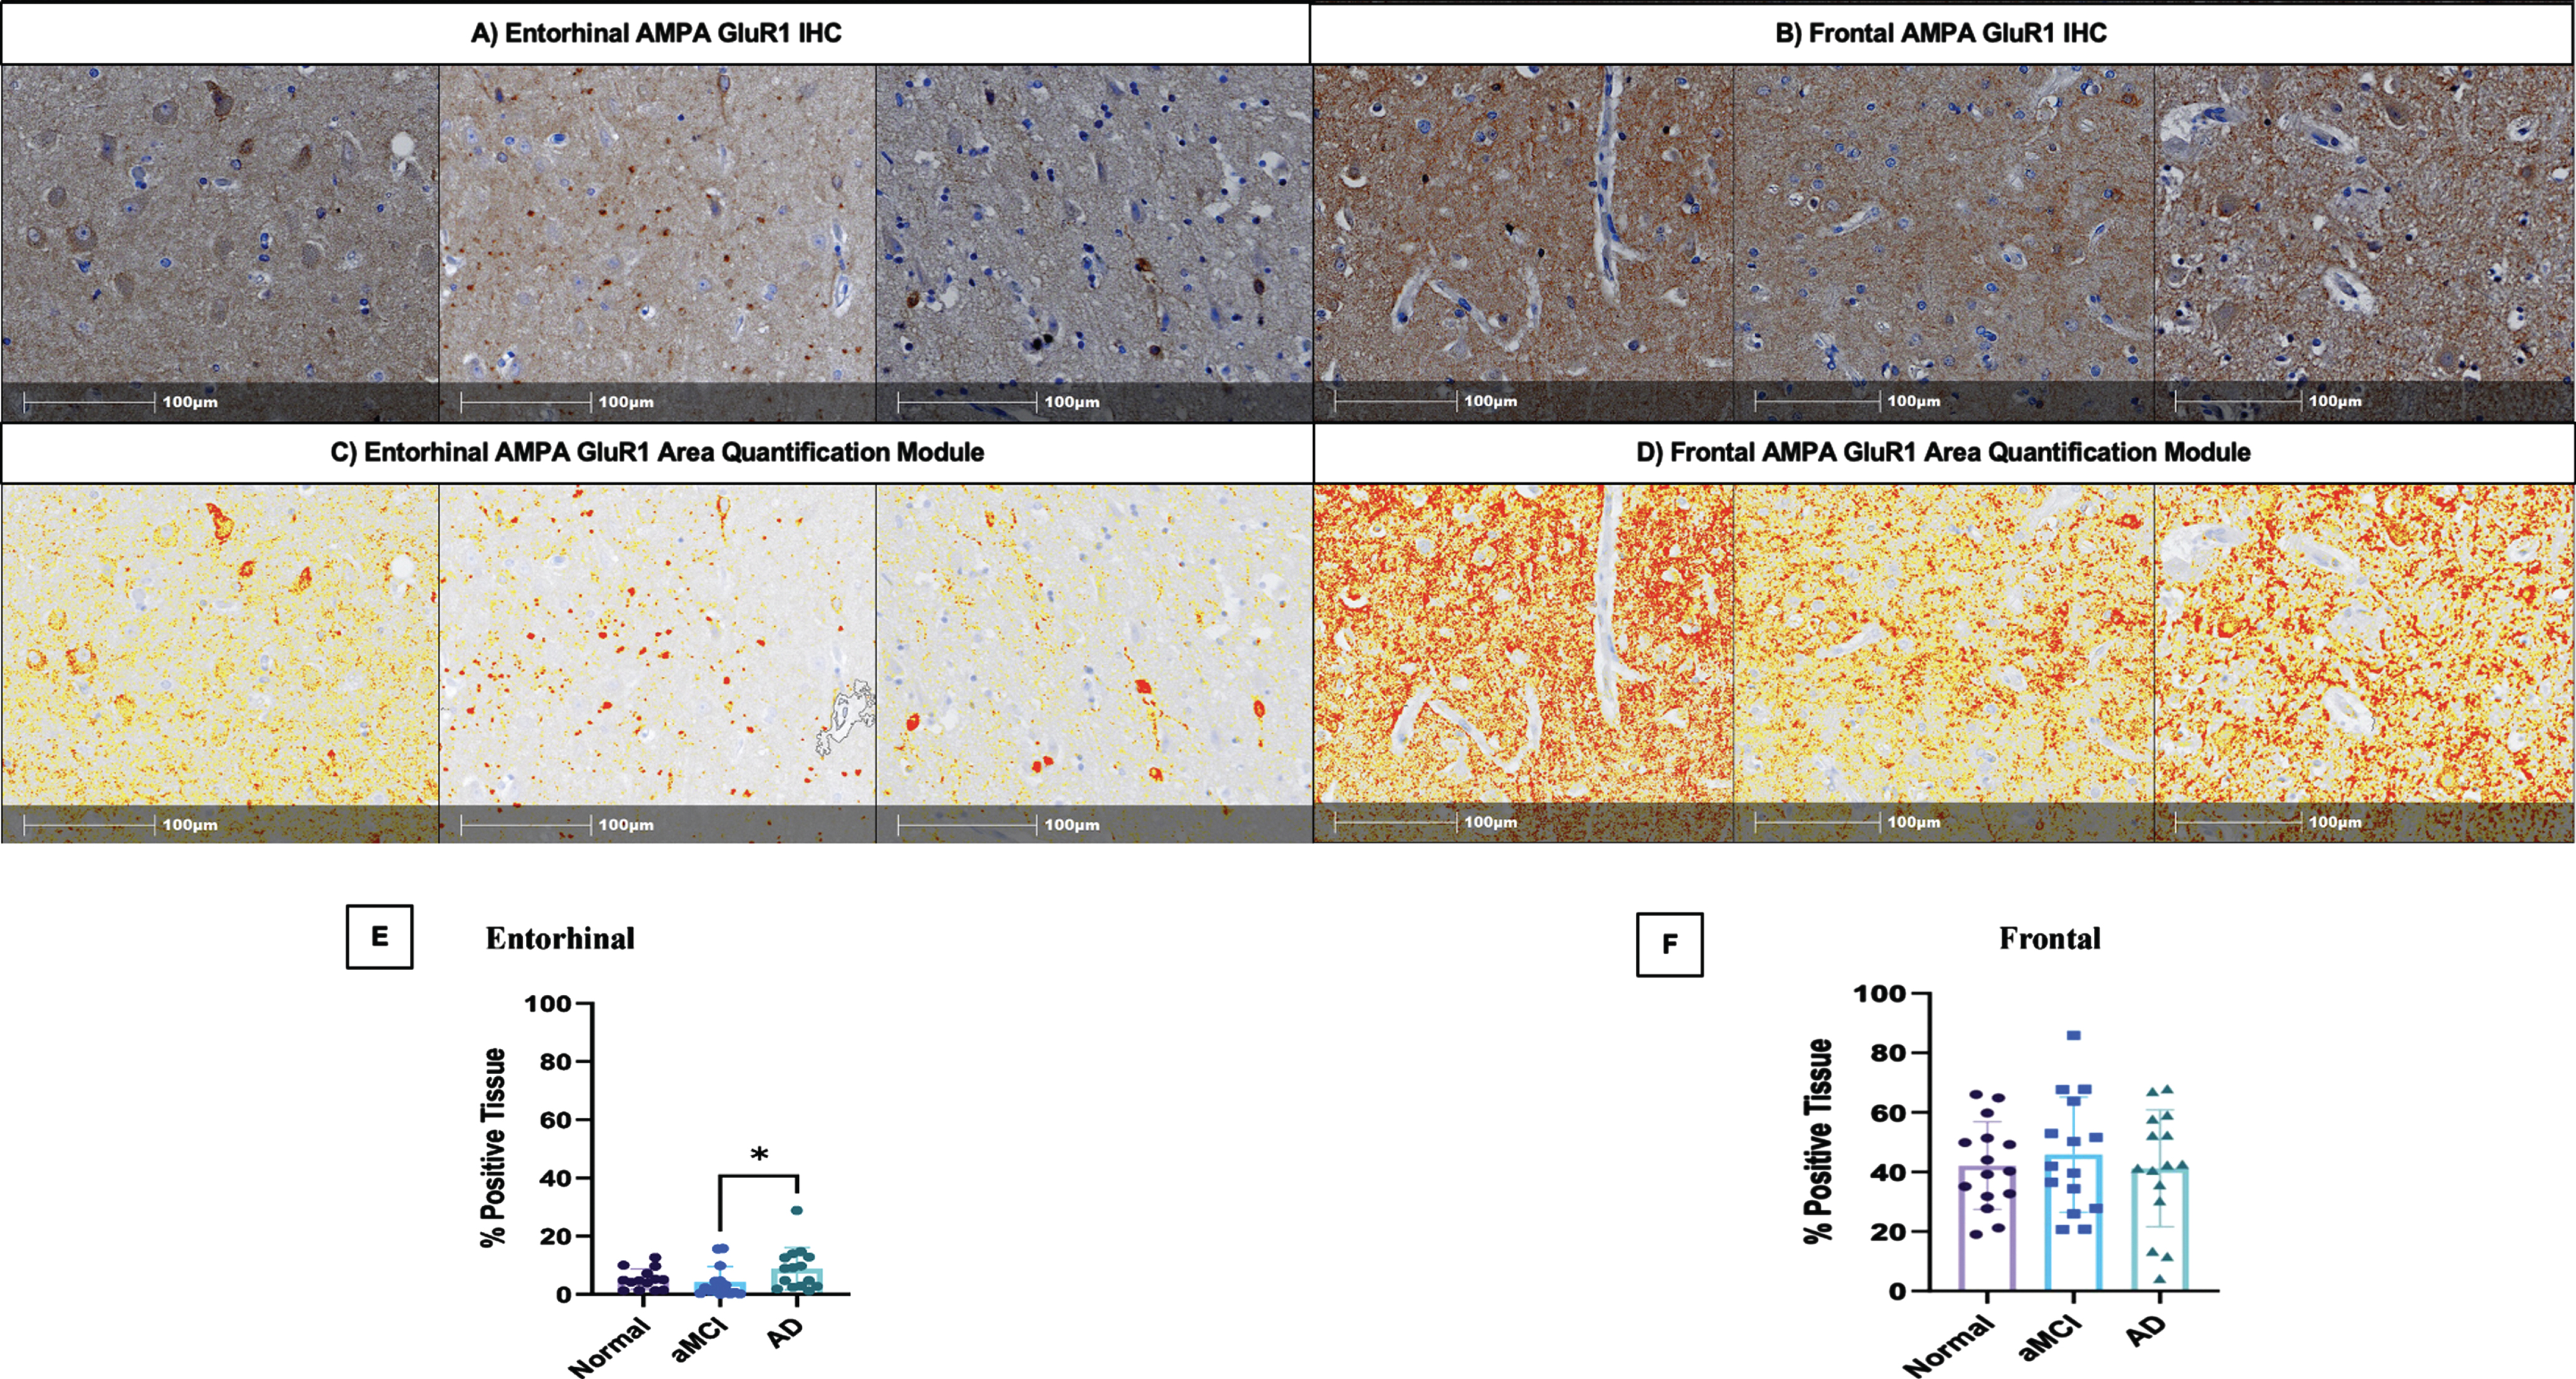 Area Quantification analysis of AMPA GluR1 receptor expression in the entorhinal cortex, and middle frontal cortex. A) AMPA GluR1 immunohistochemical staining in the entorhinal cortex of normal control, aMCI, and AD dementia cases, respectively. B) AMPA GluR1 immunohistochemical staining in the frontal cortex of normal control, aMCI, and AD dementia cases, respectively. C) Indica Labs Halo Area Quantification analysis of AMPA GluR1 immunohistochemical staining in the entorhinal cortex of normal control, aMCI, and AD dementia cases, respectively. D) Indica Labs Halo Area Quantification analysis of AMPA GluR1 immunohistochemical staining in the frontal cortex of normal control, aMCI, and AD dementia cases, respectively. E) % Positive area of AMPA GluR1 staining in entorhinal cortex stratified by clinical group designations (normal, aMCI, AD). p = 0.03. F) % Positive area of AMPA GluR1 staining in the frontal cortex stratified by clinical group designations (normal, aMCI, AD). aMCI, amnestic mild cognitive impairment; AD, Alzheimer’s disease dementia.